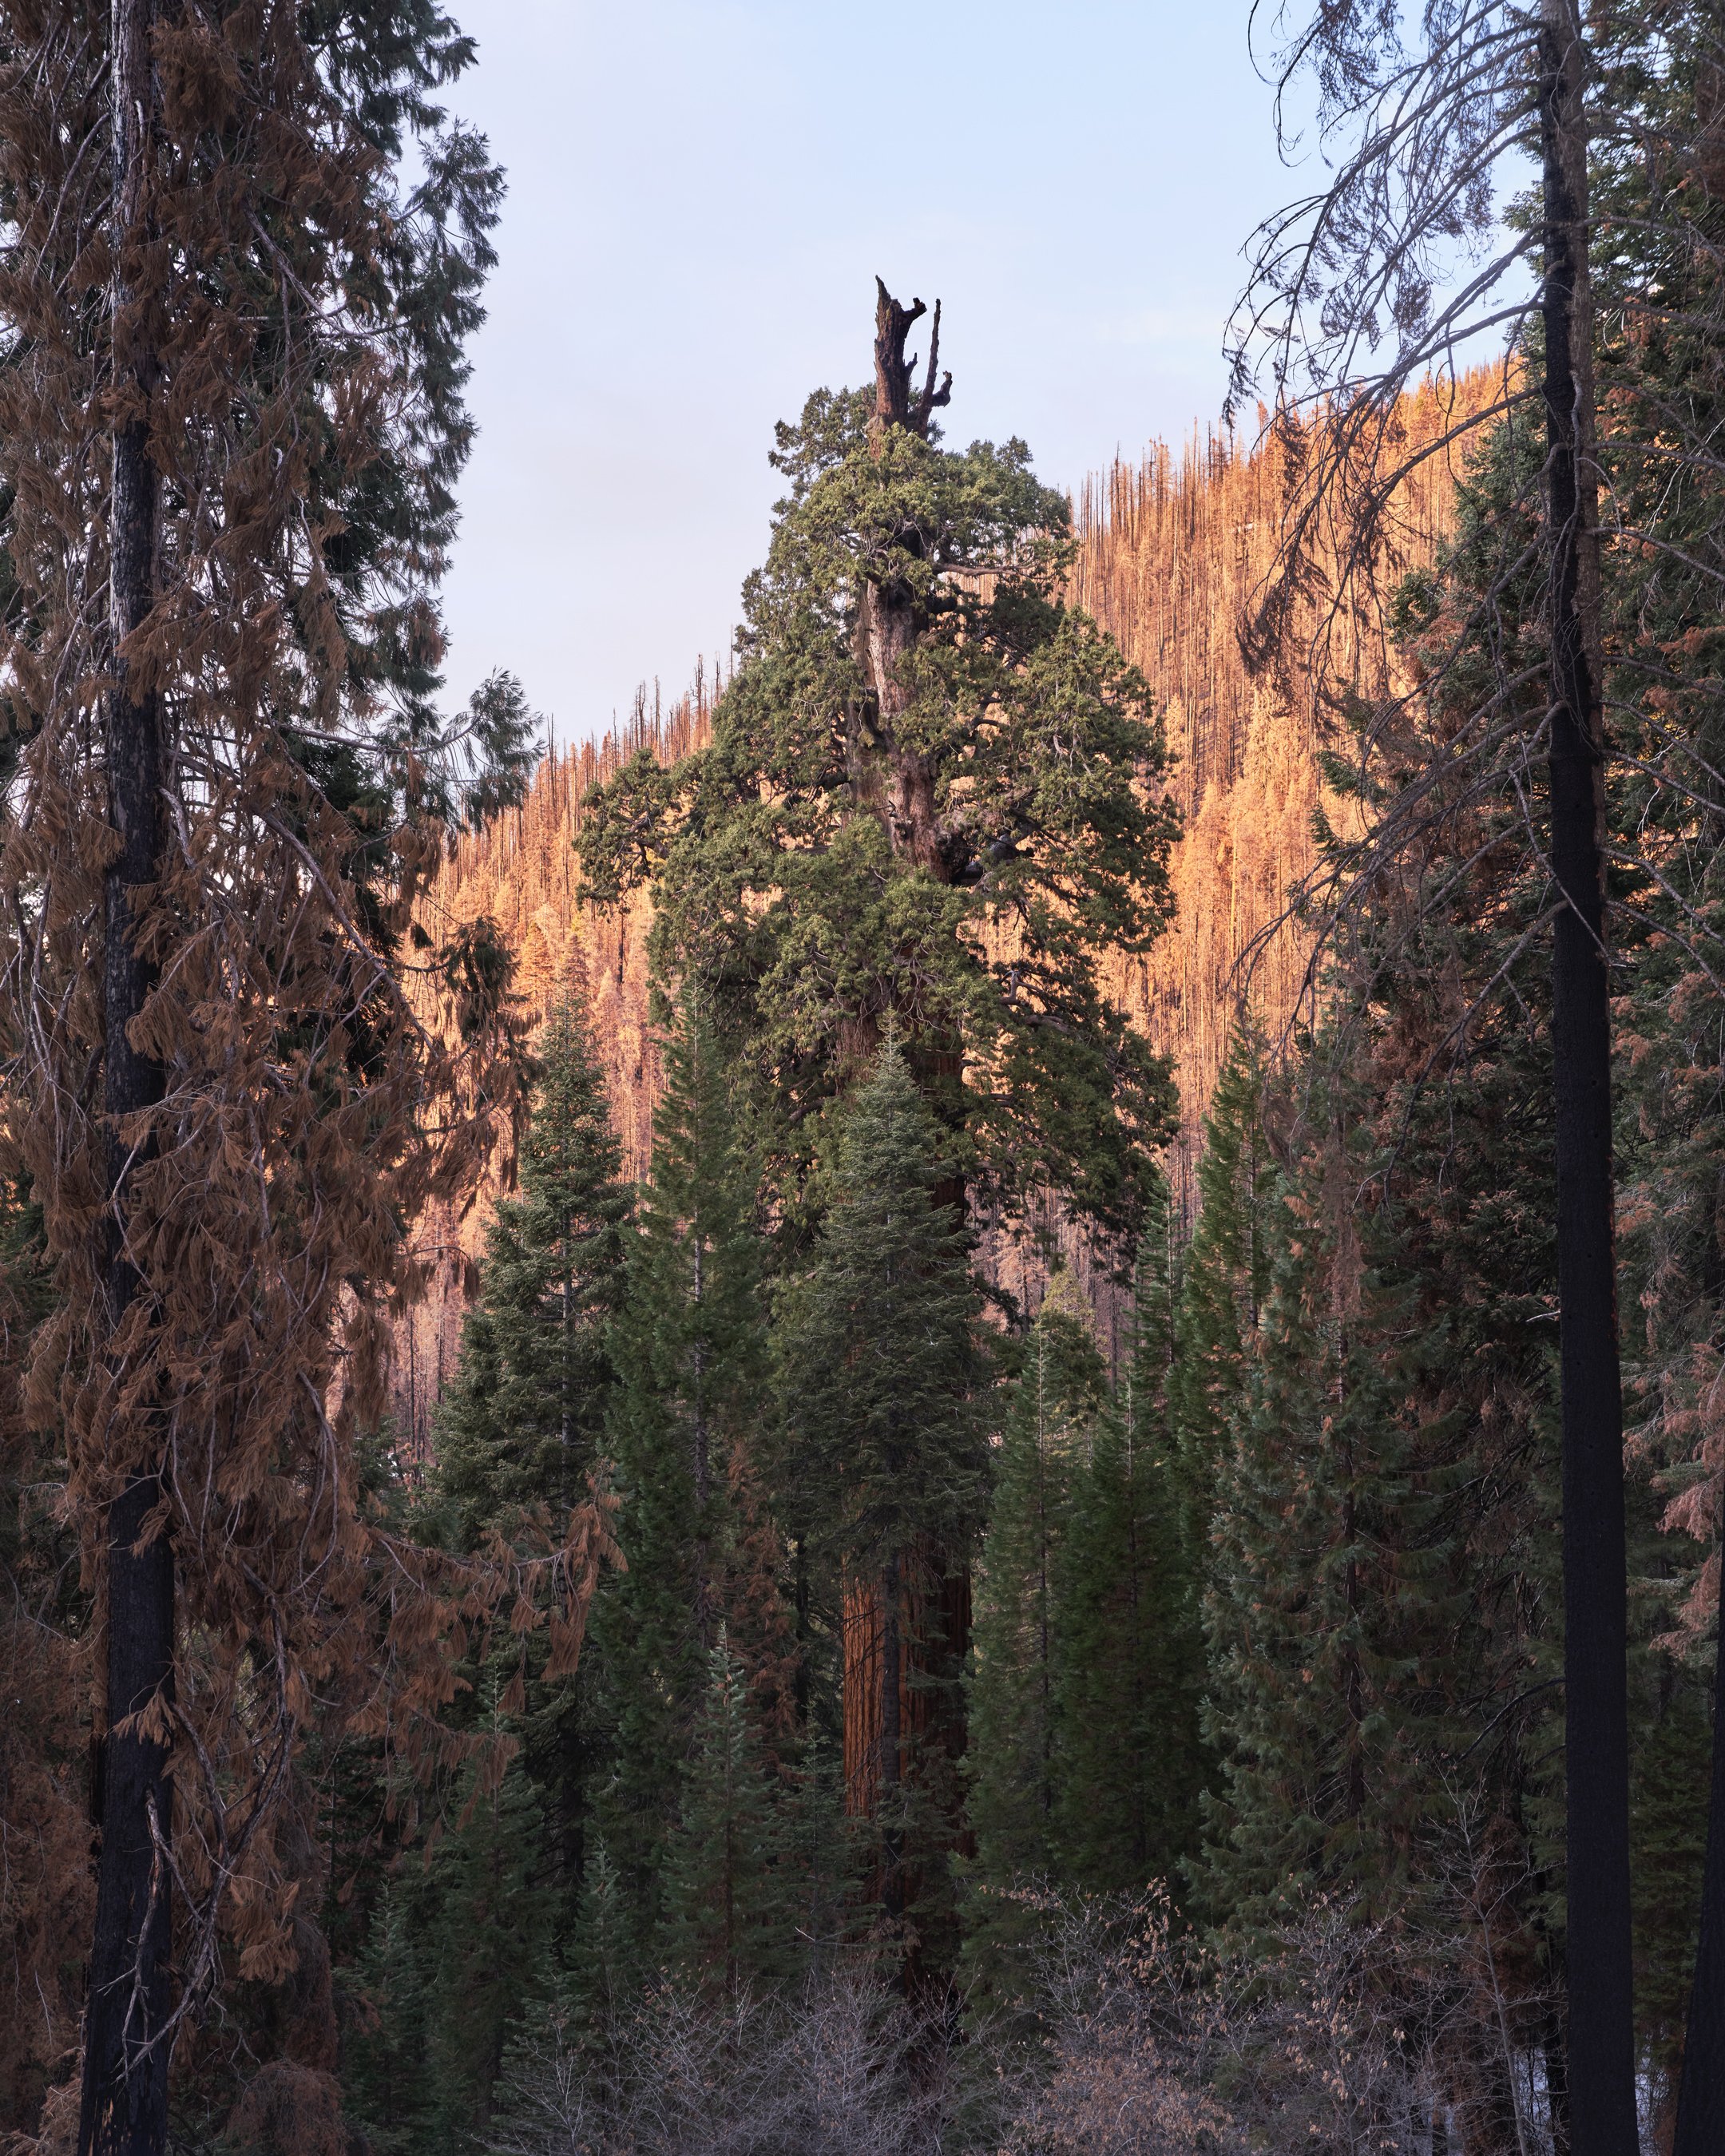 gathering_growth_foundation_stagg_tree_giant_sequoia_brian_kelley_02-2022_09.jpg